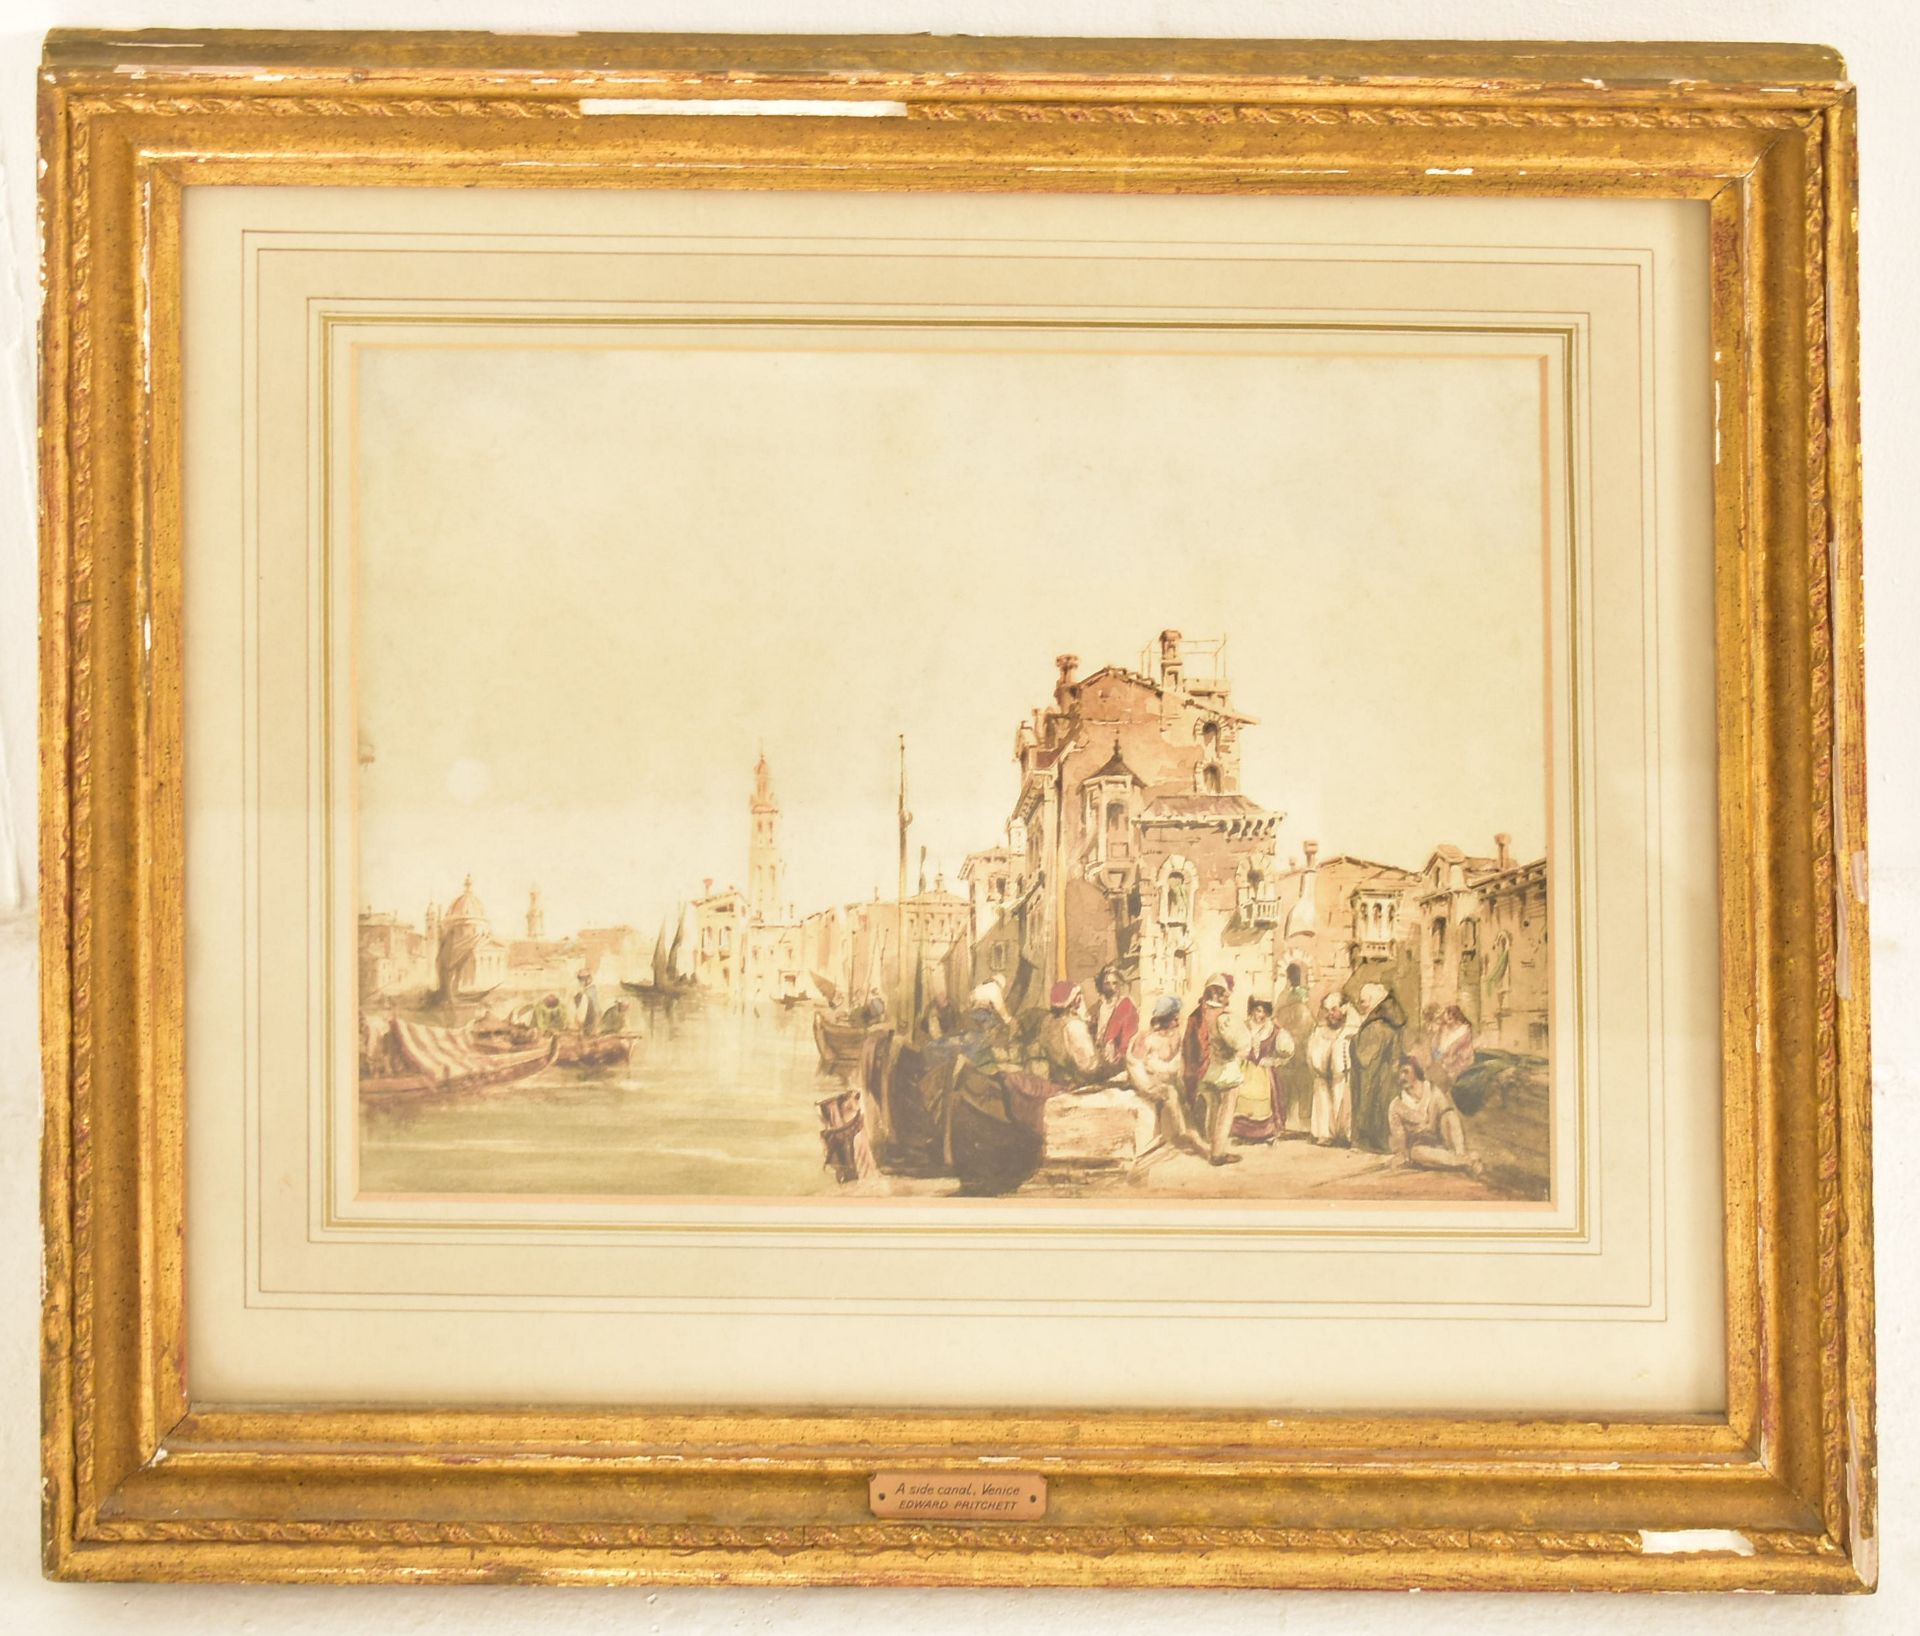 EDWARD PRITCHETT - A SIDE CANAL, VENICE - WATERCOLOUR PAINTING - Image 2 of 5